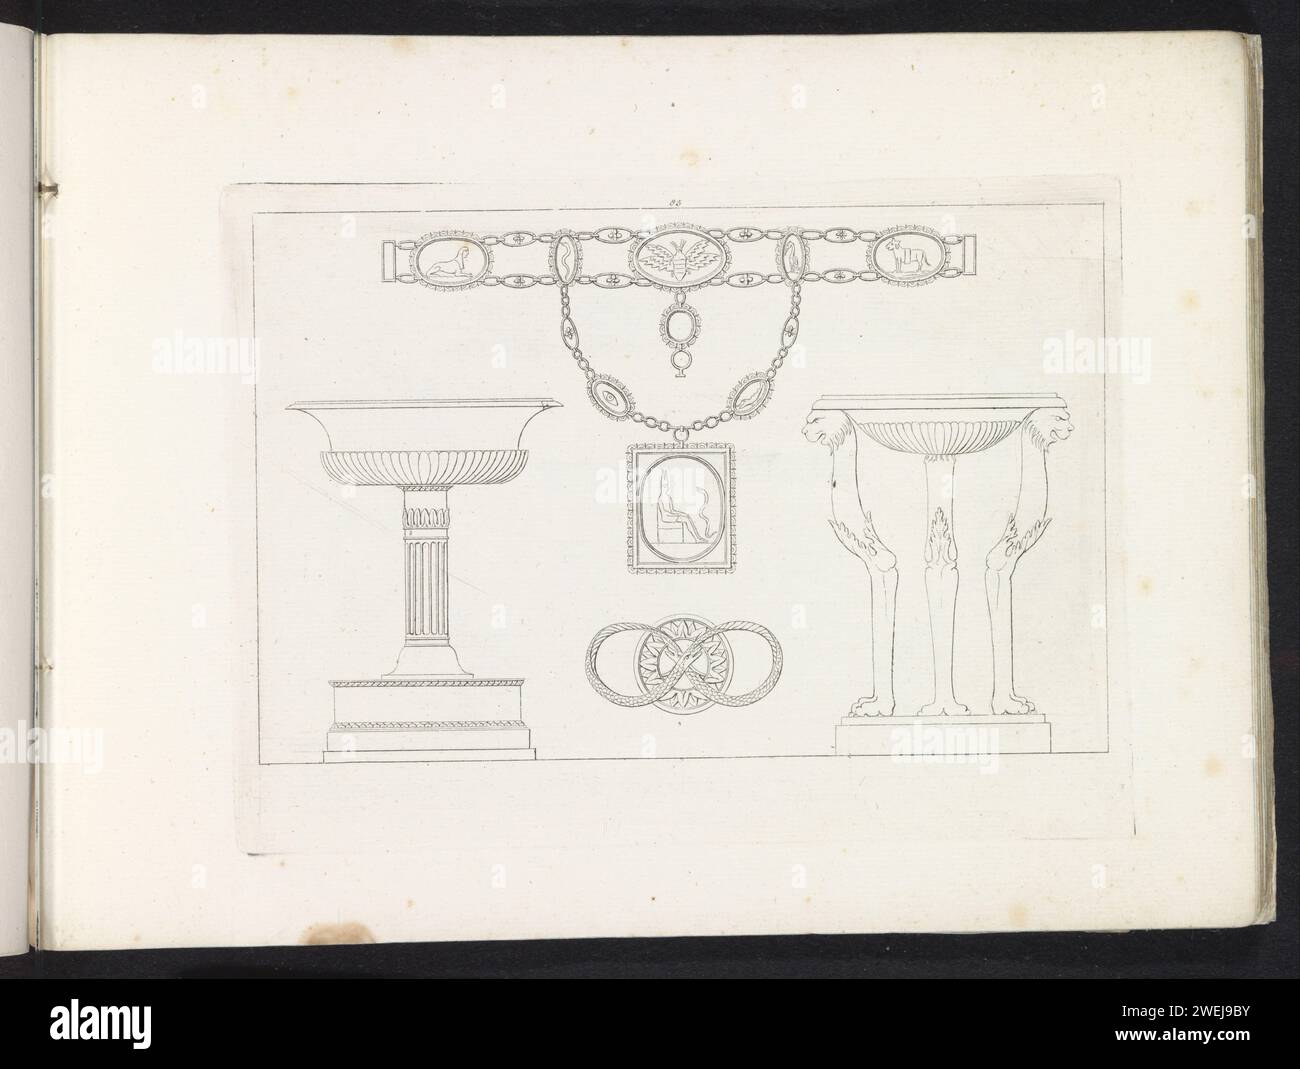 Necklace, Baptismal Font, Ouroboros and a Side Table, Pietro Ruga, After Lorenzo Roccheggiani, 1817 print Print is part of an album.  paper etching ornaments  art. table. baptismal font. necklace. serpent Ouroboros Stock Photo